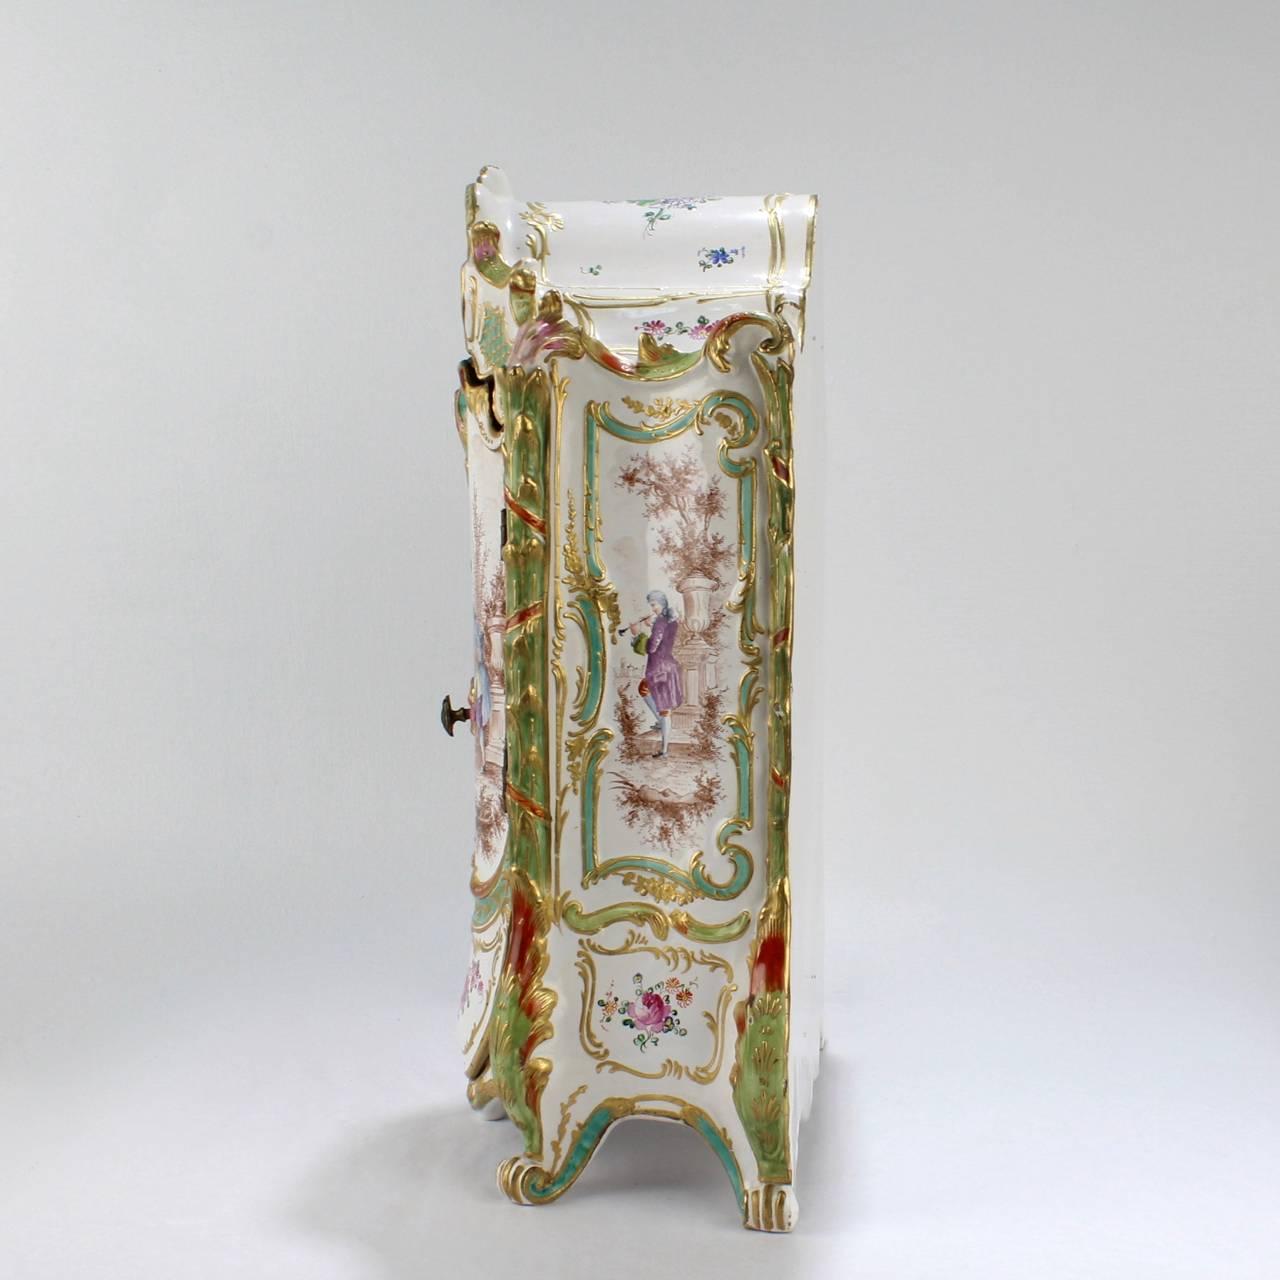 19th Century Antique Marseille French Faience Pottery Miniature Armoire or Jewelry Casket